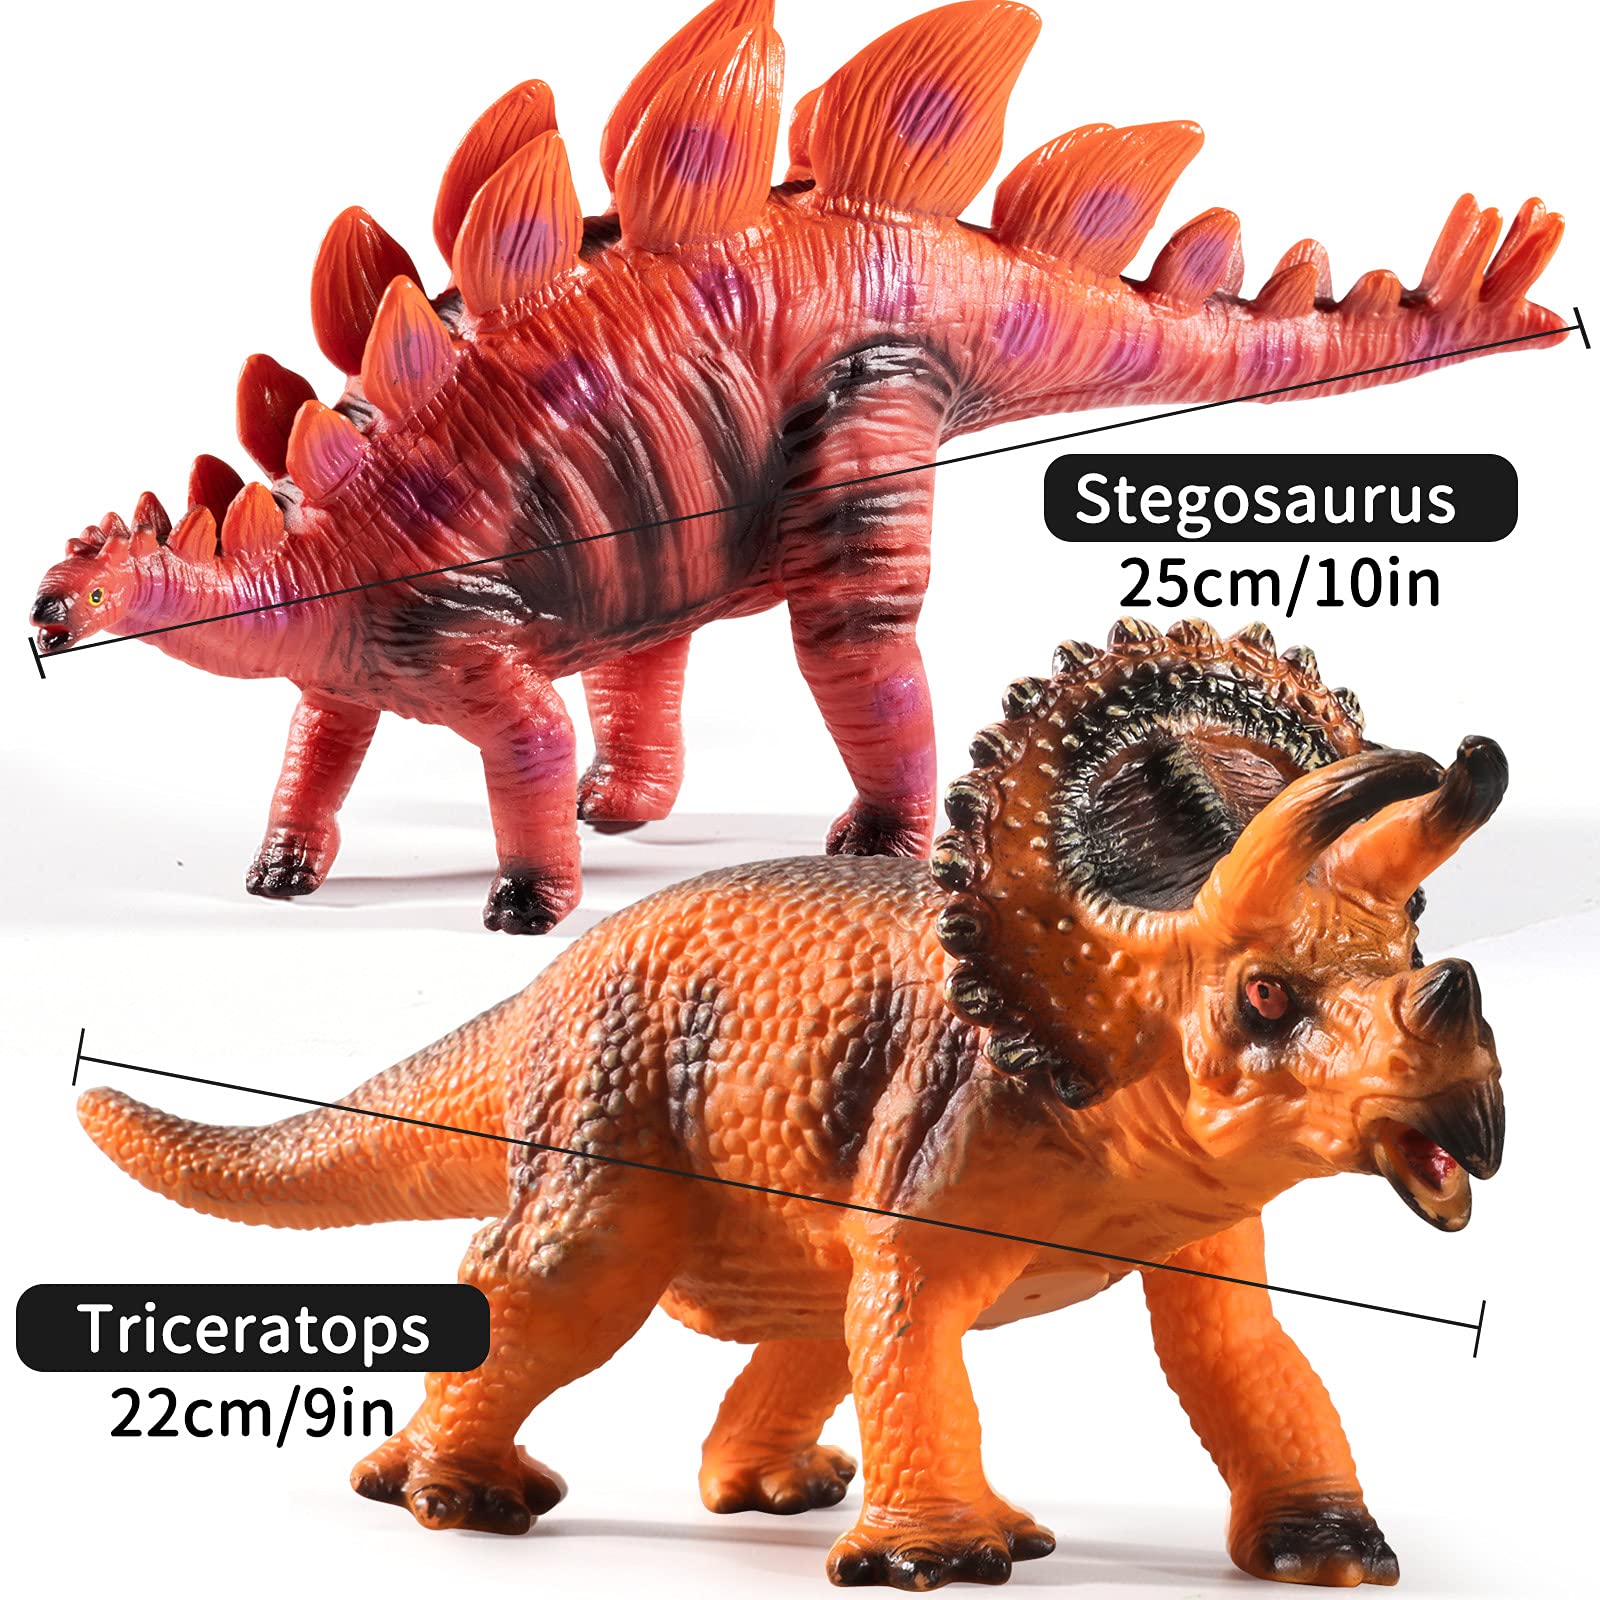 TEMI 7 Pieces Jumbo Dinosaur Toys for Kids and Toddlers,Jurassic World Dinosaur T-Rex Triceratops, Large Soft Dinosaur Toys Set for Dinosaur Lovers - Dinosaur Party Favors, Birthday Gifts